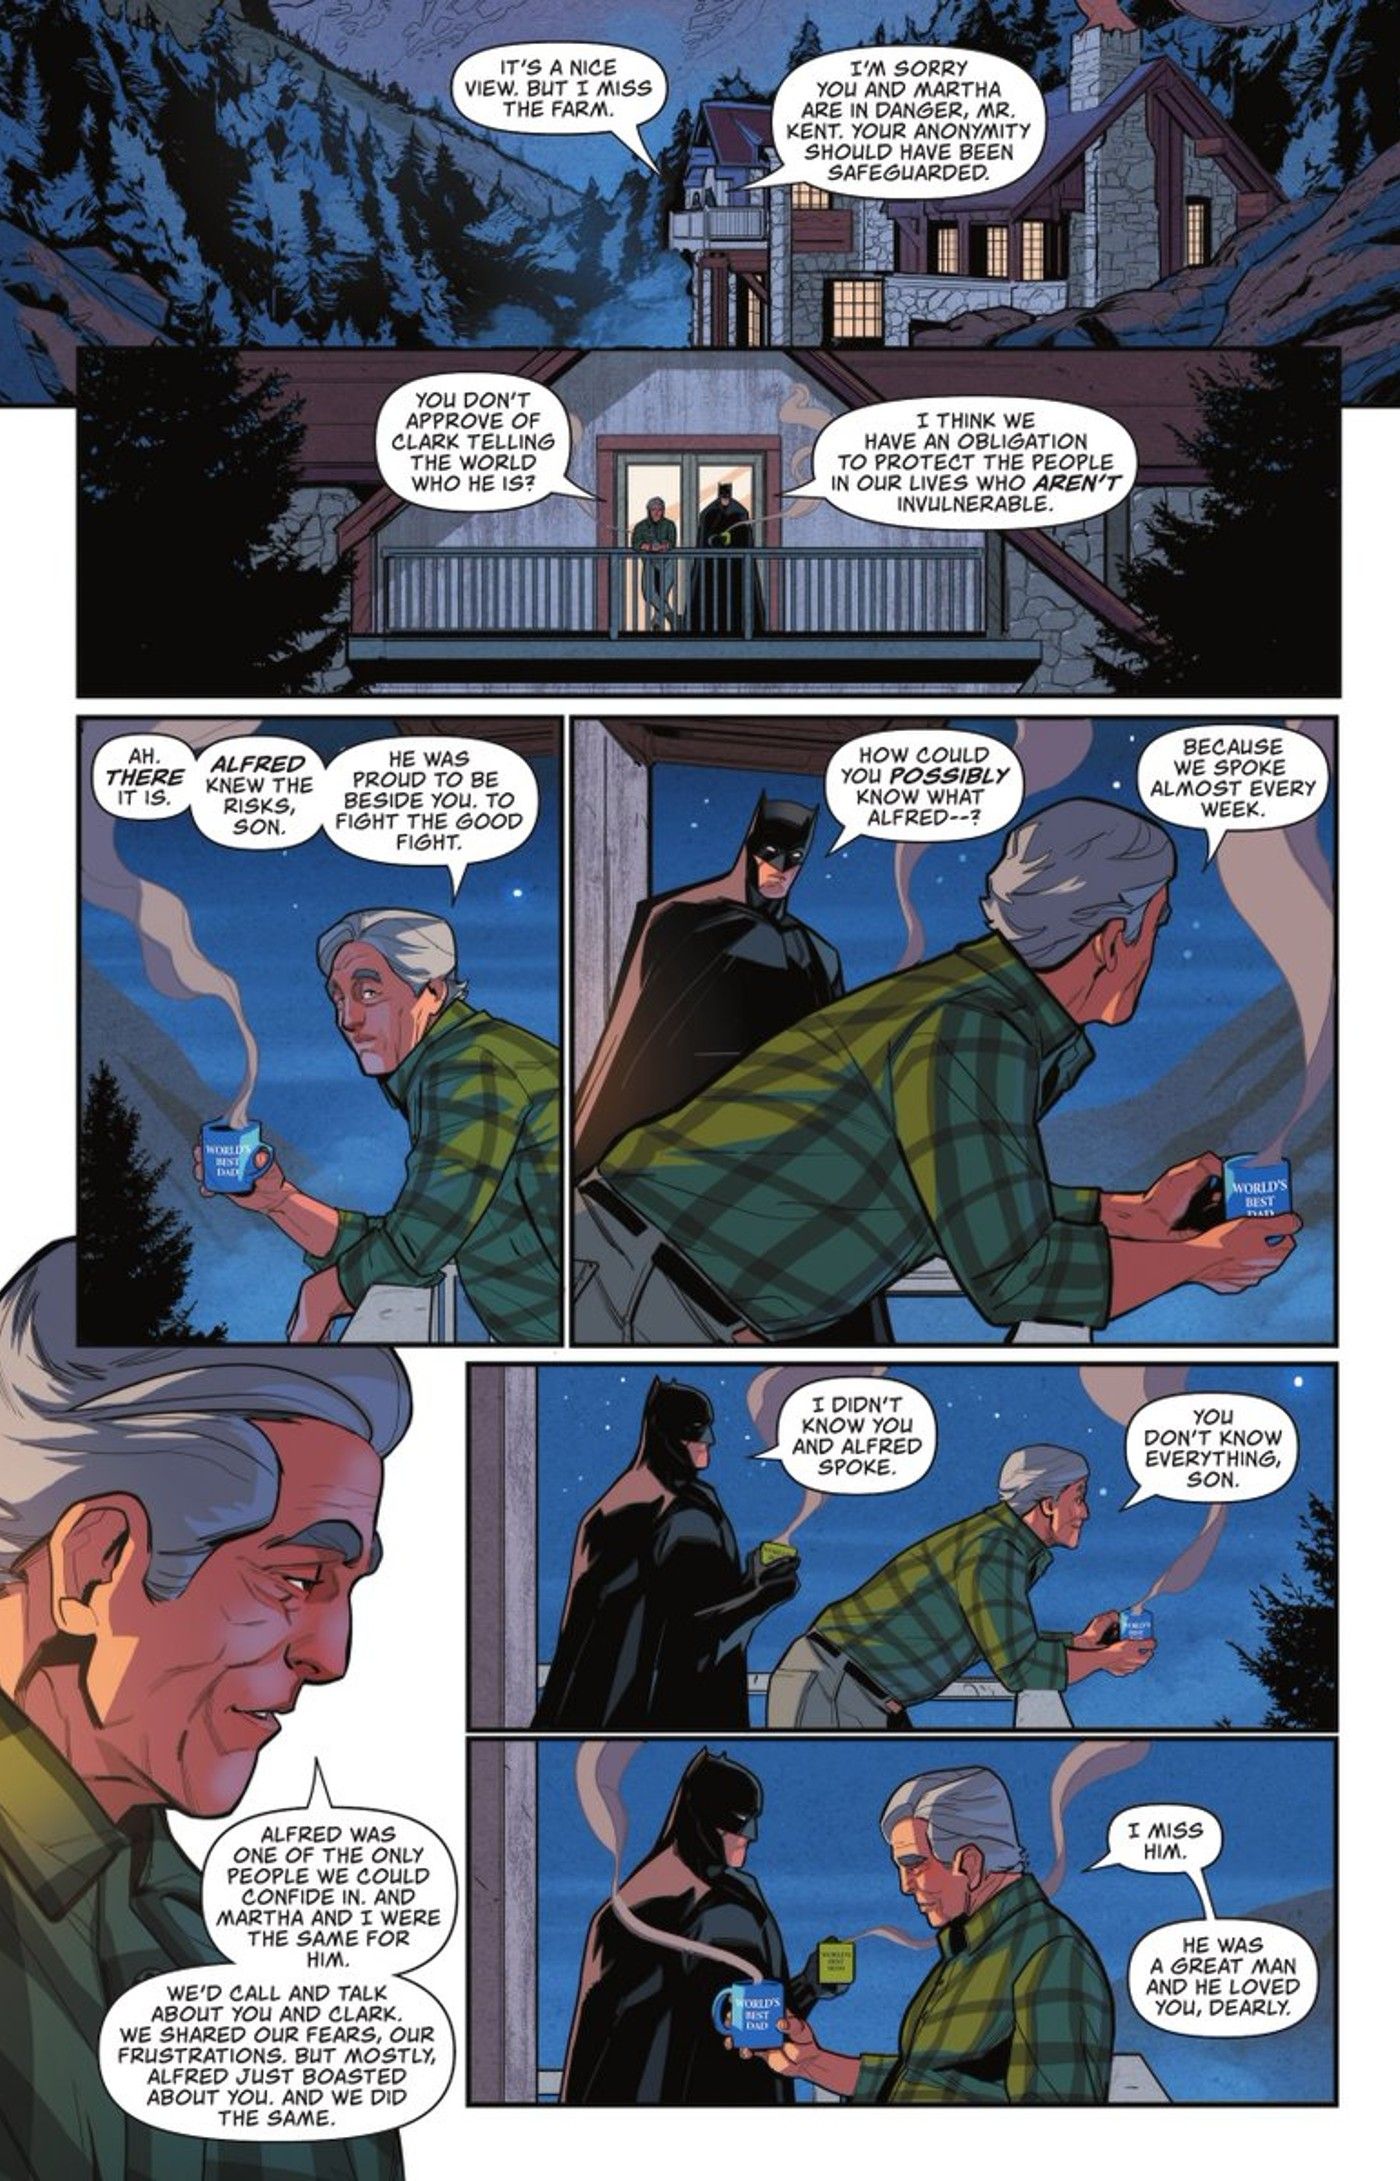 Batman & Superman’s Mentor Link Proves They Were Destined To Be Allies